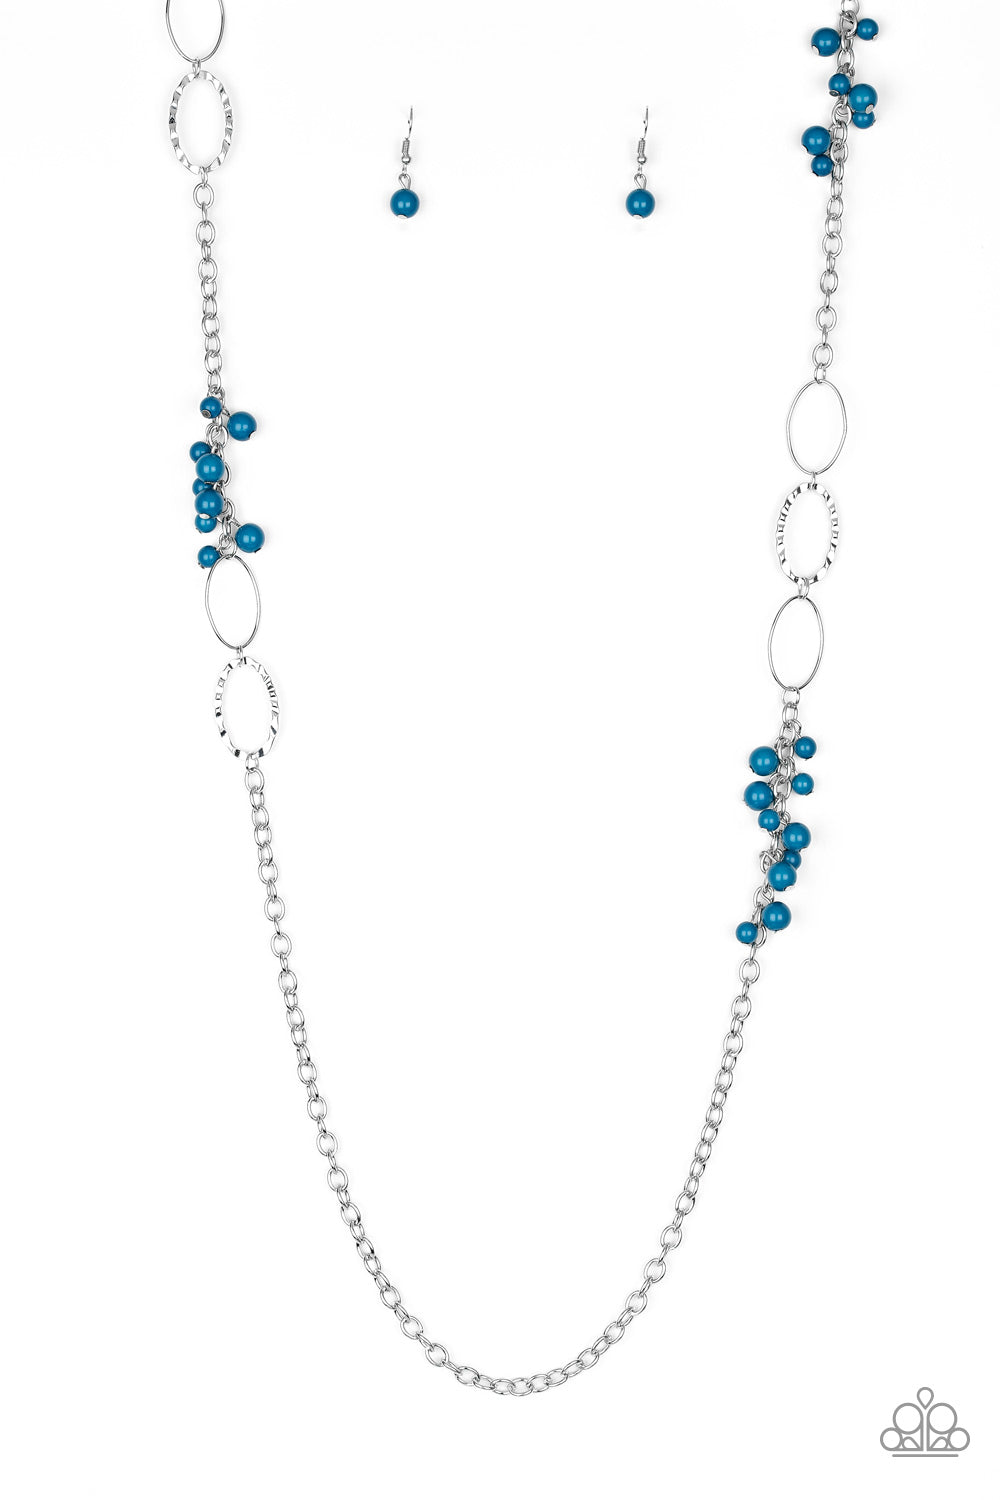 Flirty Foxtrot - Blue and Silver Fashion Necklace - Paparazzi Accessories - Smooth and hammered silver rings join clusters of refreshing blue beads along a shimmery silver chain for a colorful look. Features an adjustable clasp closure. Sold as one individual necklace.